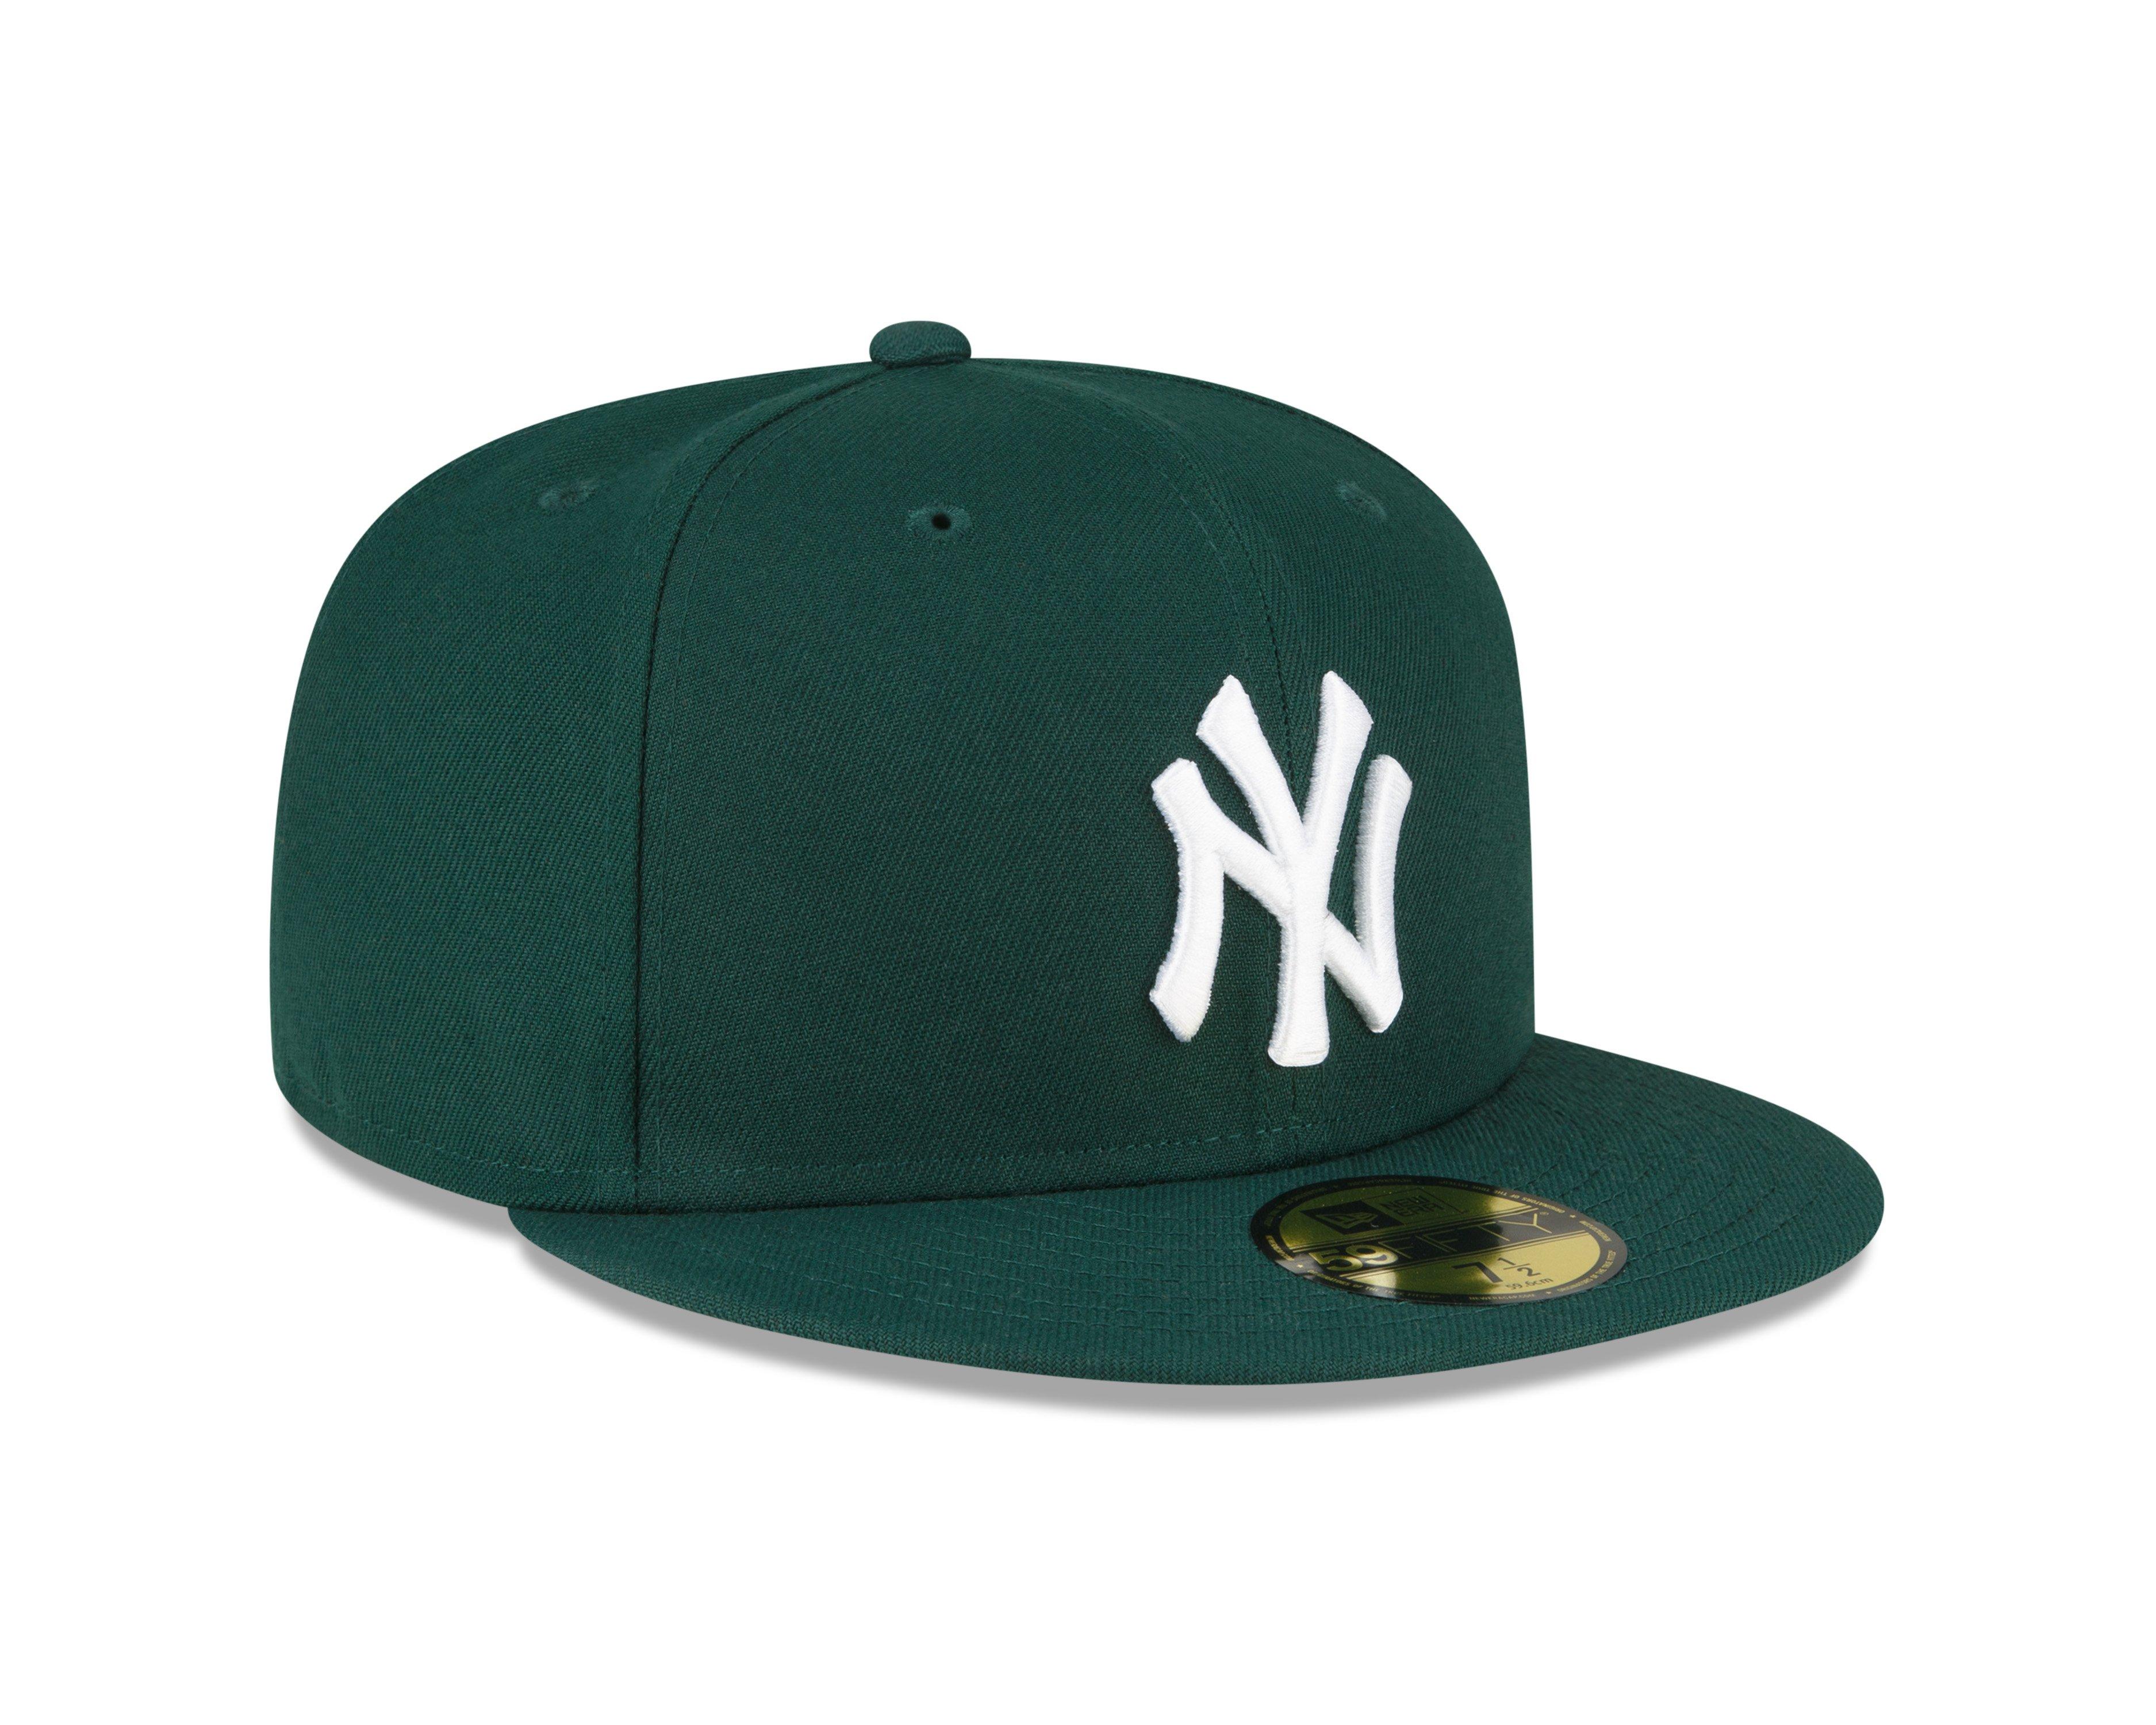 New York Yankees New Era 5950 2Tone Basic Fitted Hat - Cyber Green/Green w/Outline